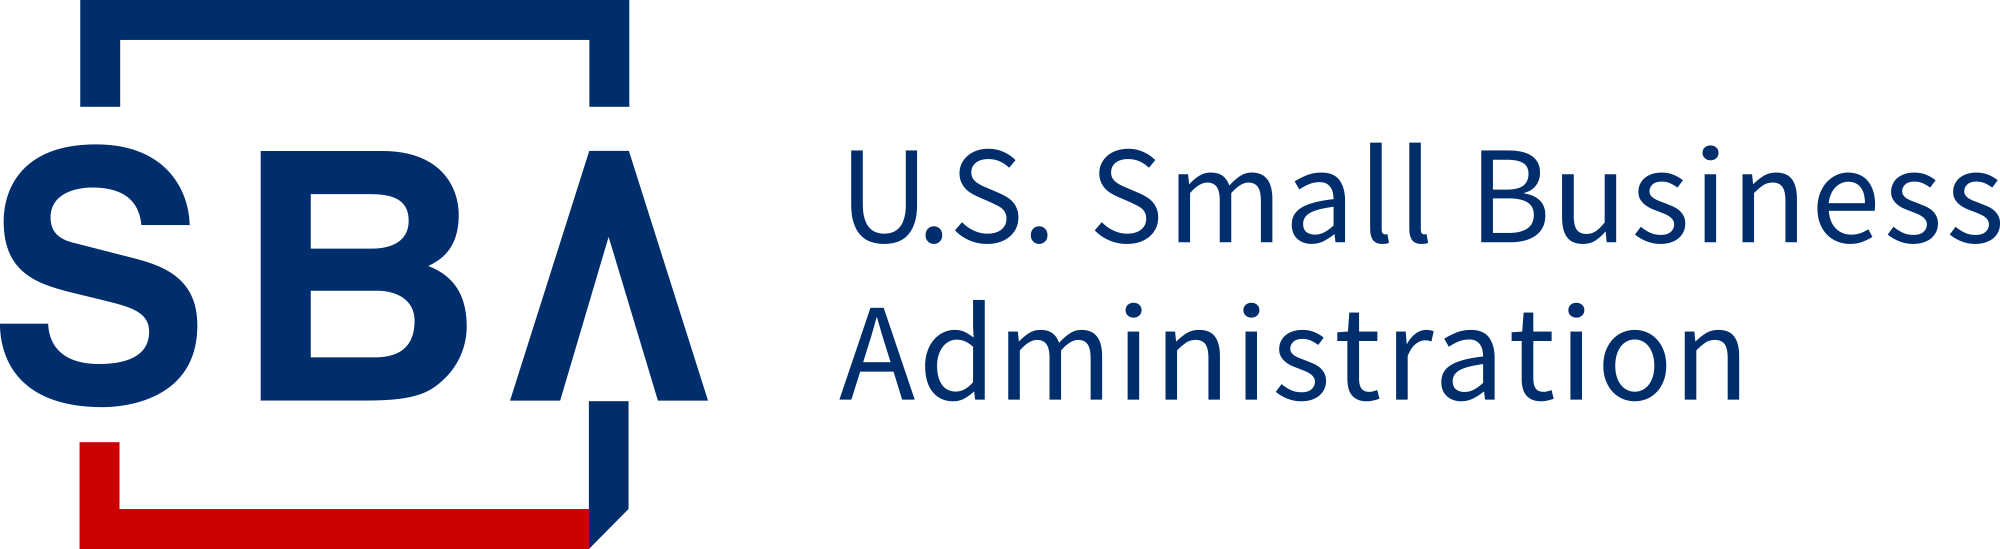 United States Small Business Administration logo in red, white and blue